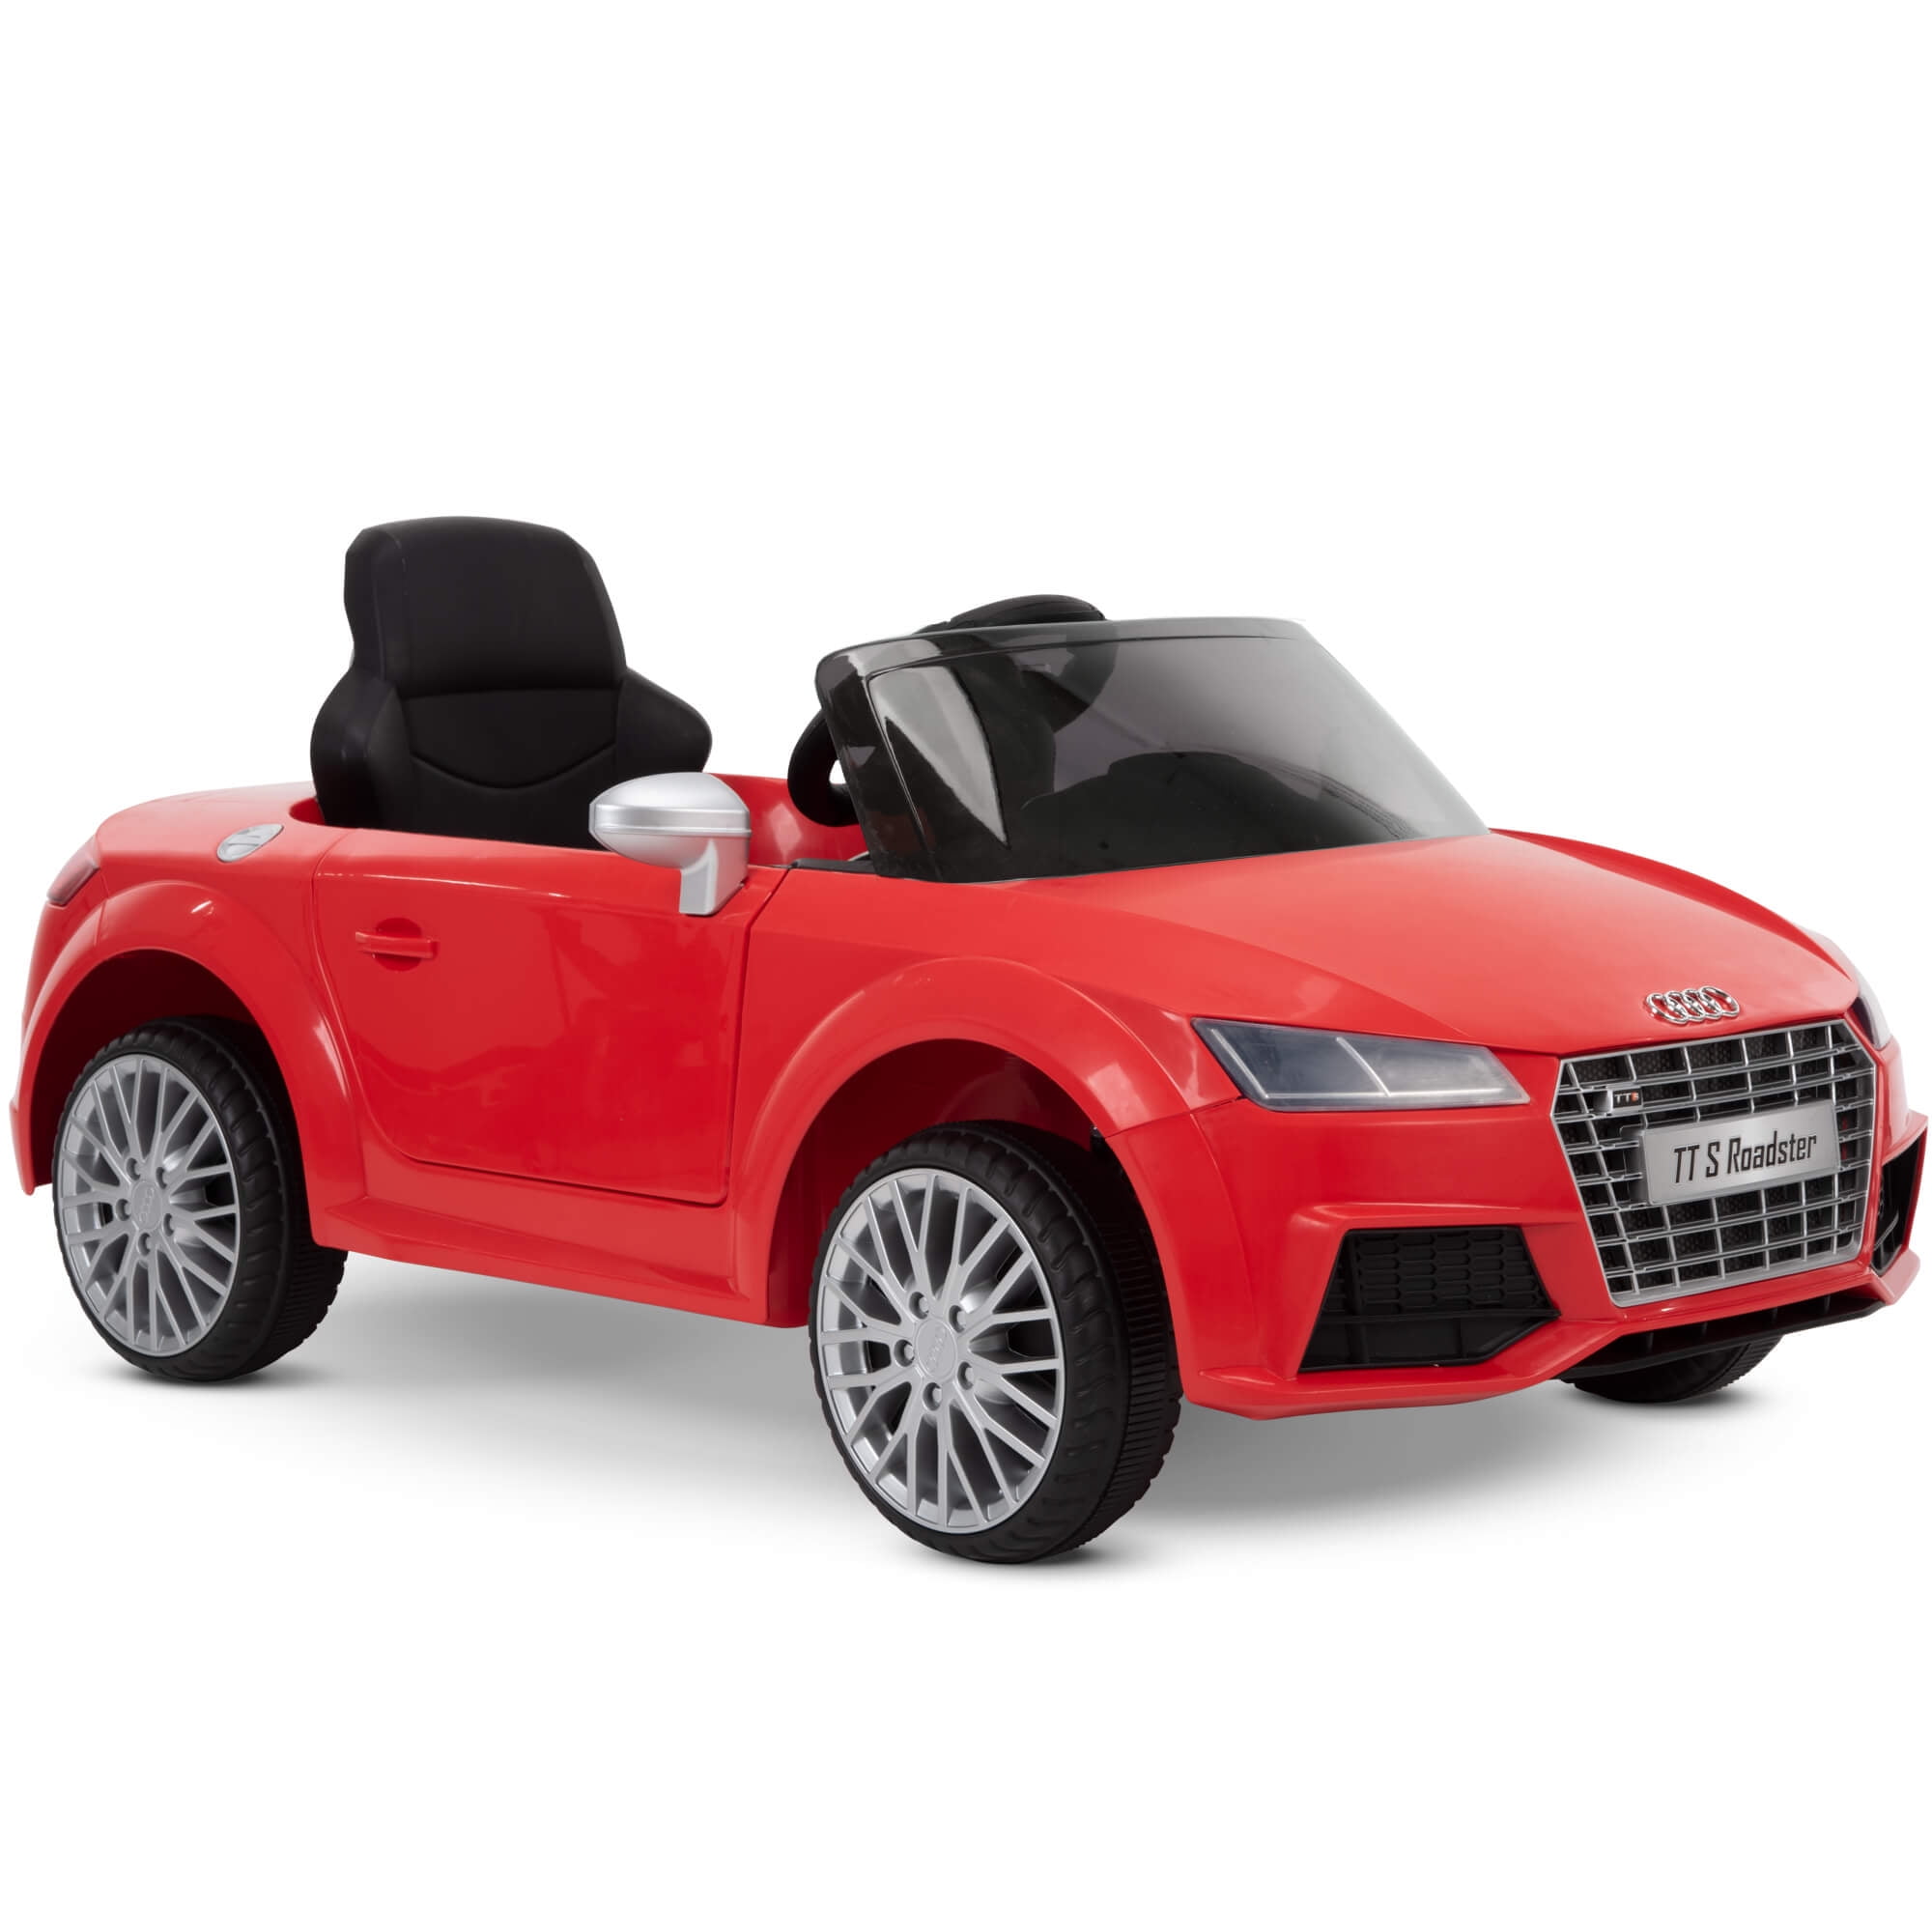 ELECTRIC 12V Audi A3 toy car ride on licensed PERSONALISED kids number plates 